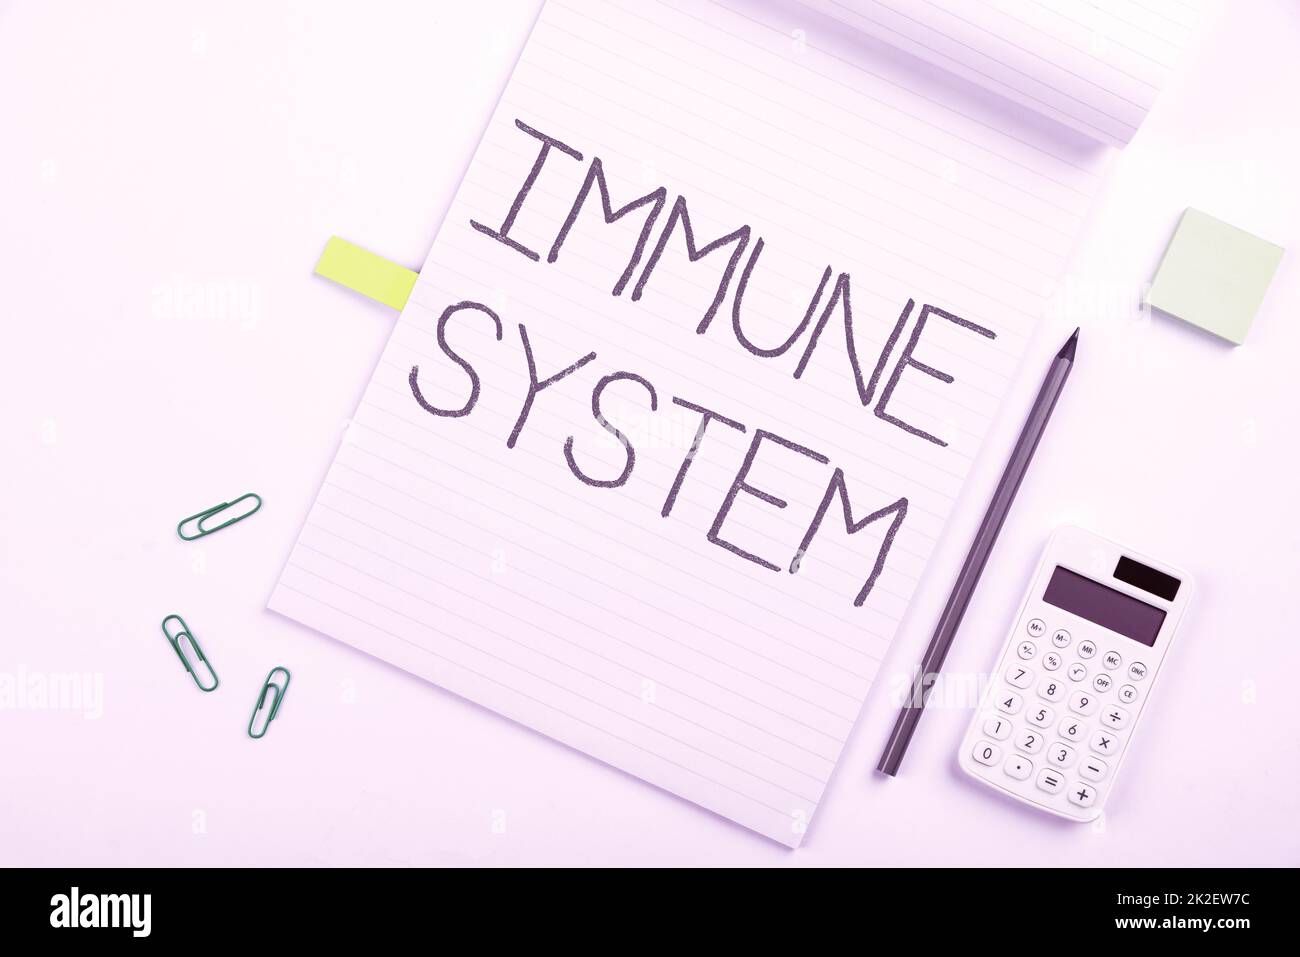 Writing displaying text Immune System. Concept meaning host defense system comprising many biological structures Multiple Assorted Collection Office Stationery Photo Placed Over Table Stock Photo